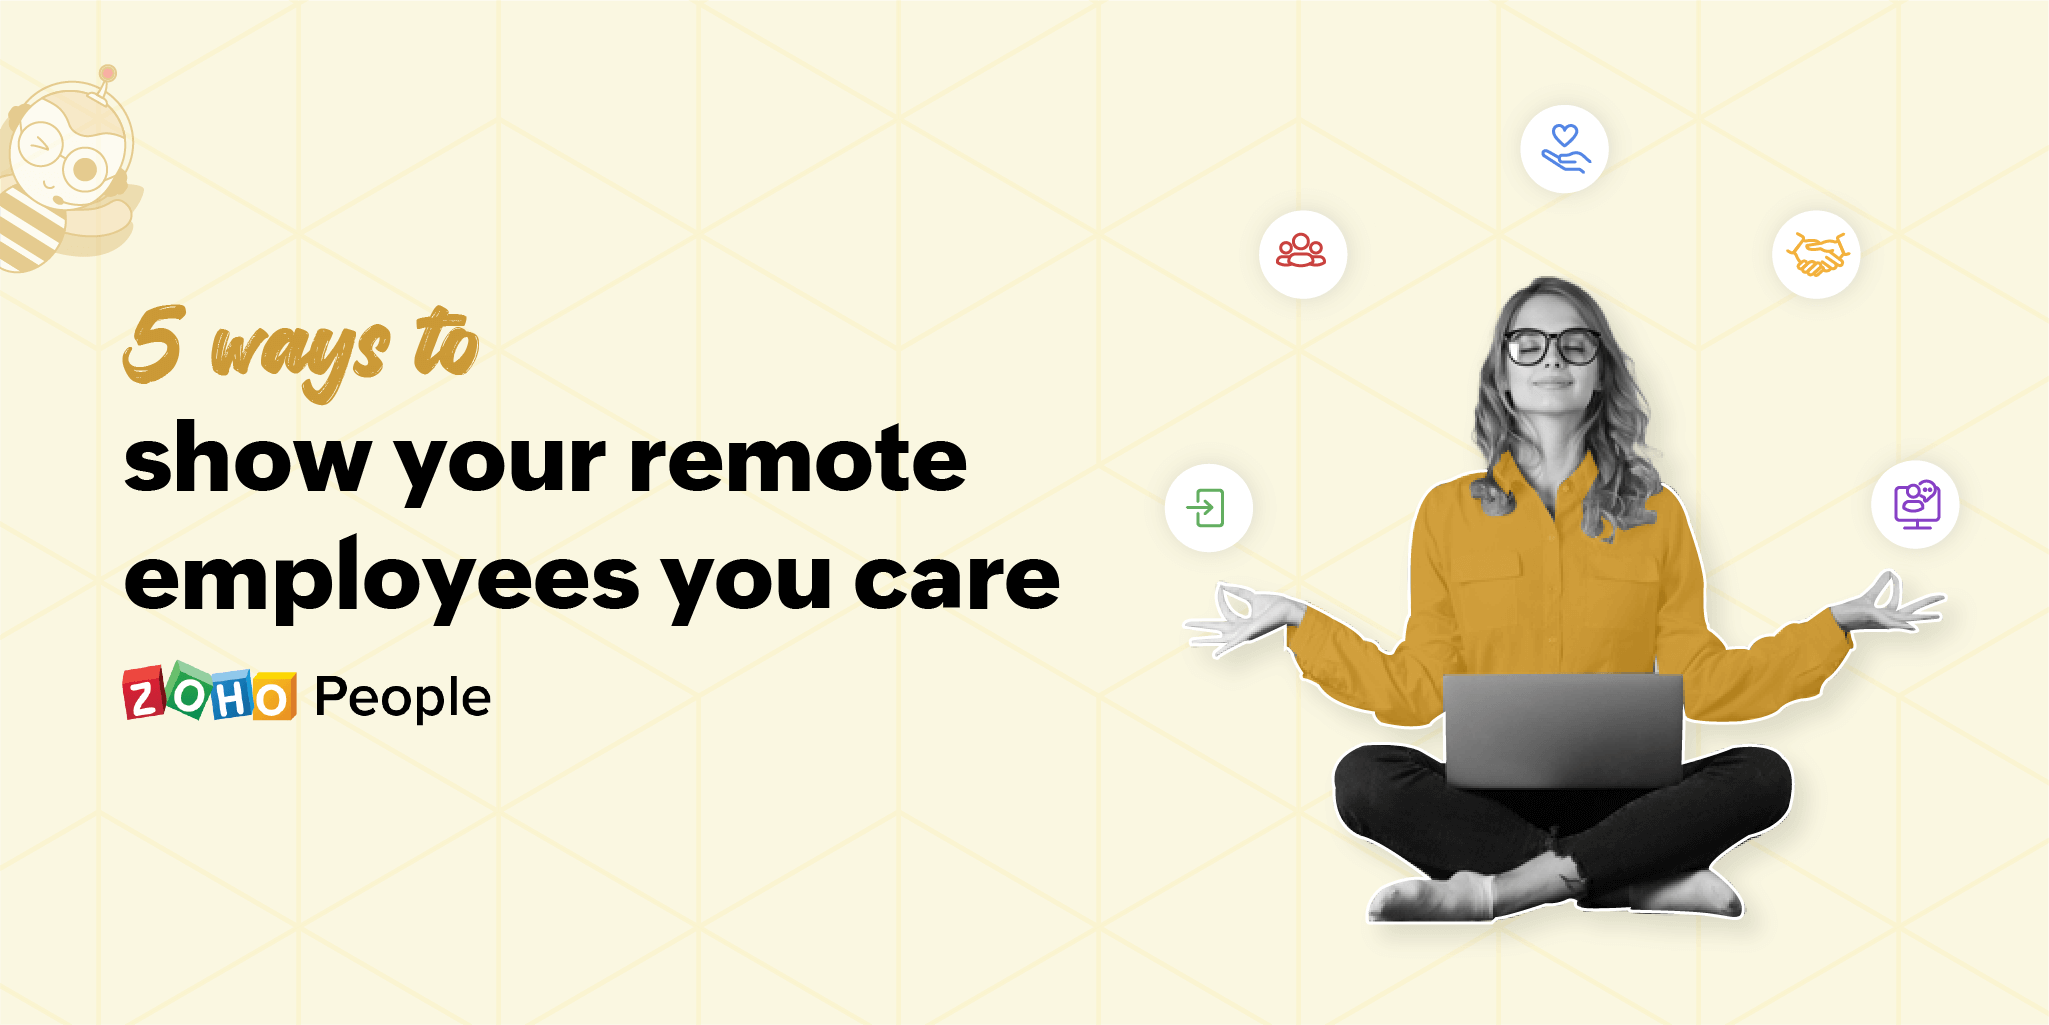 Here’s how you can show your remote employees you care